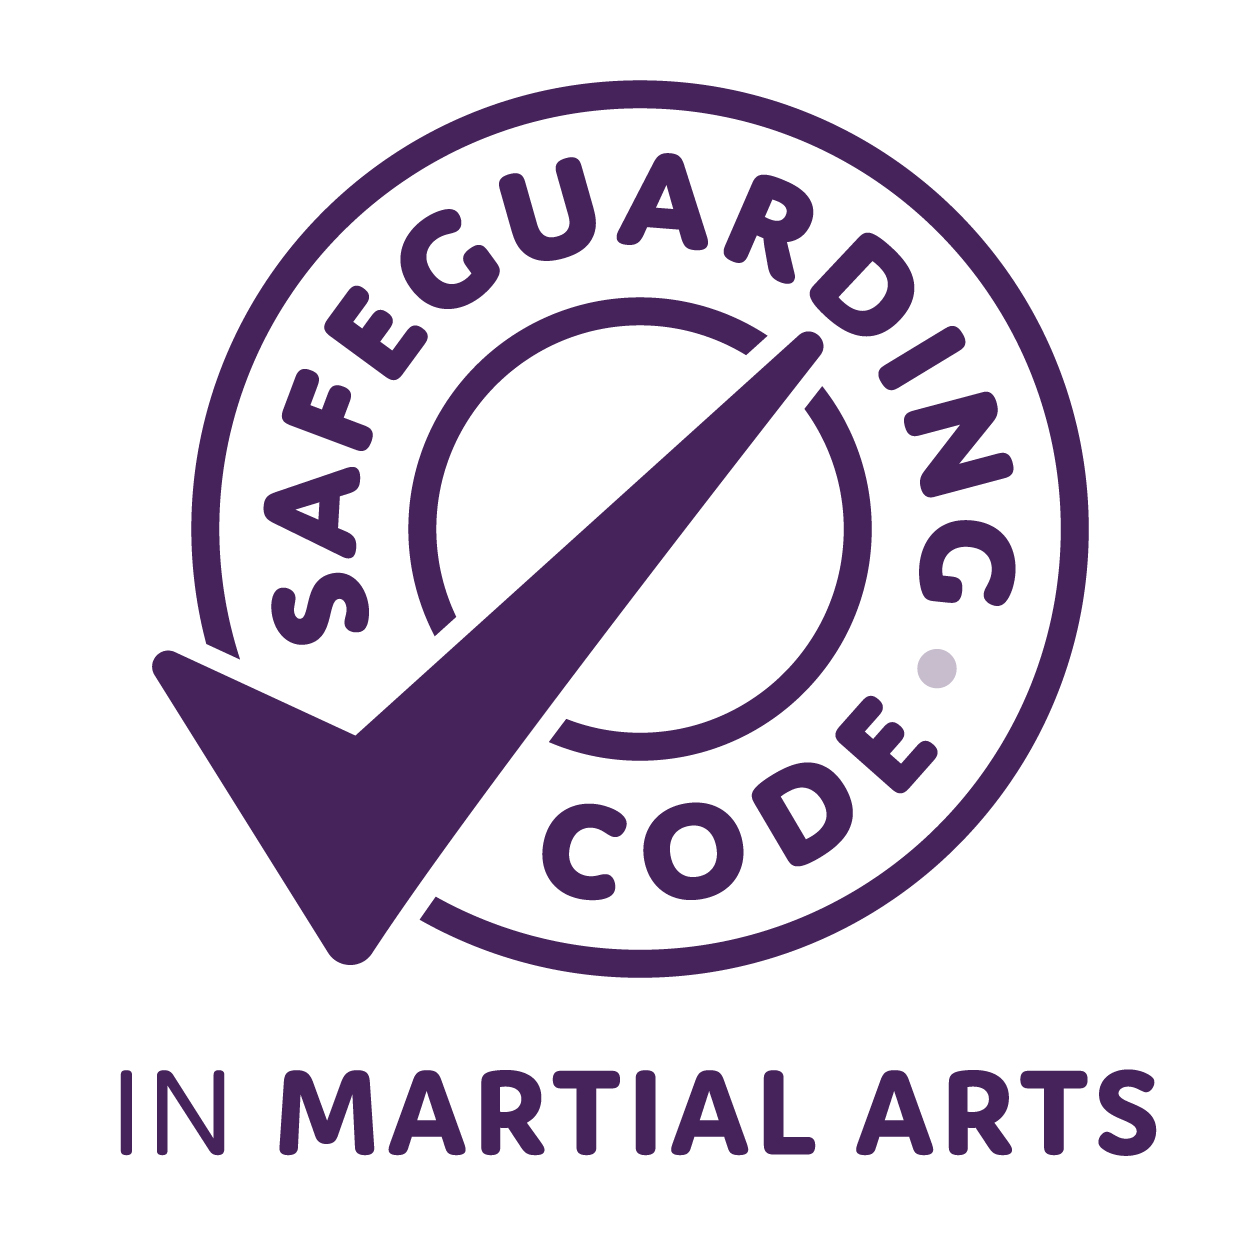 SOLO STUDIOS leads the way with new Safeguarding Code